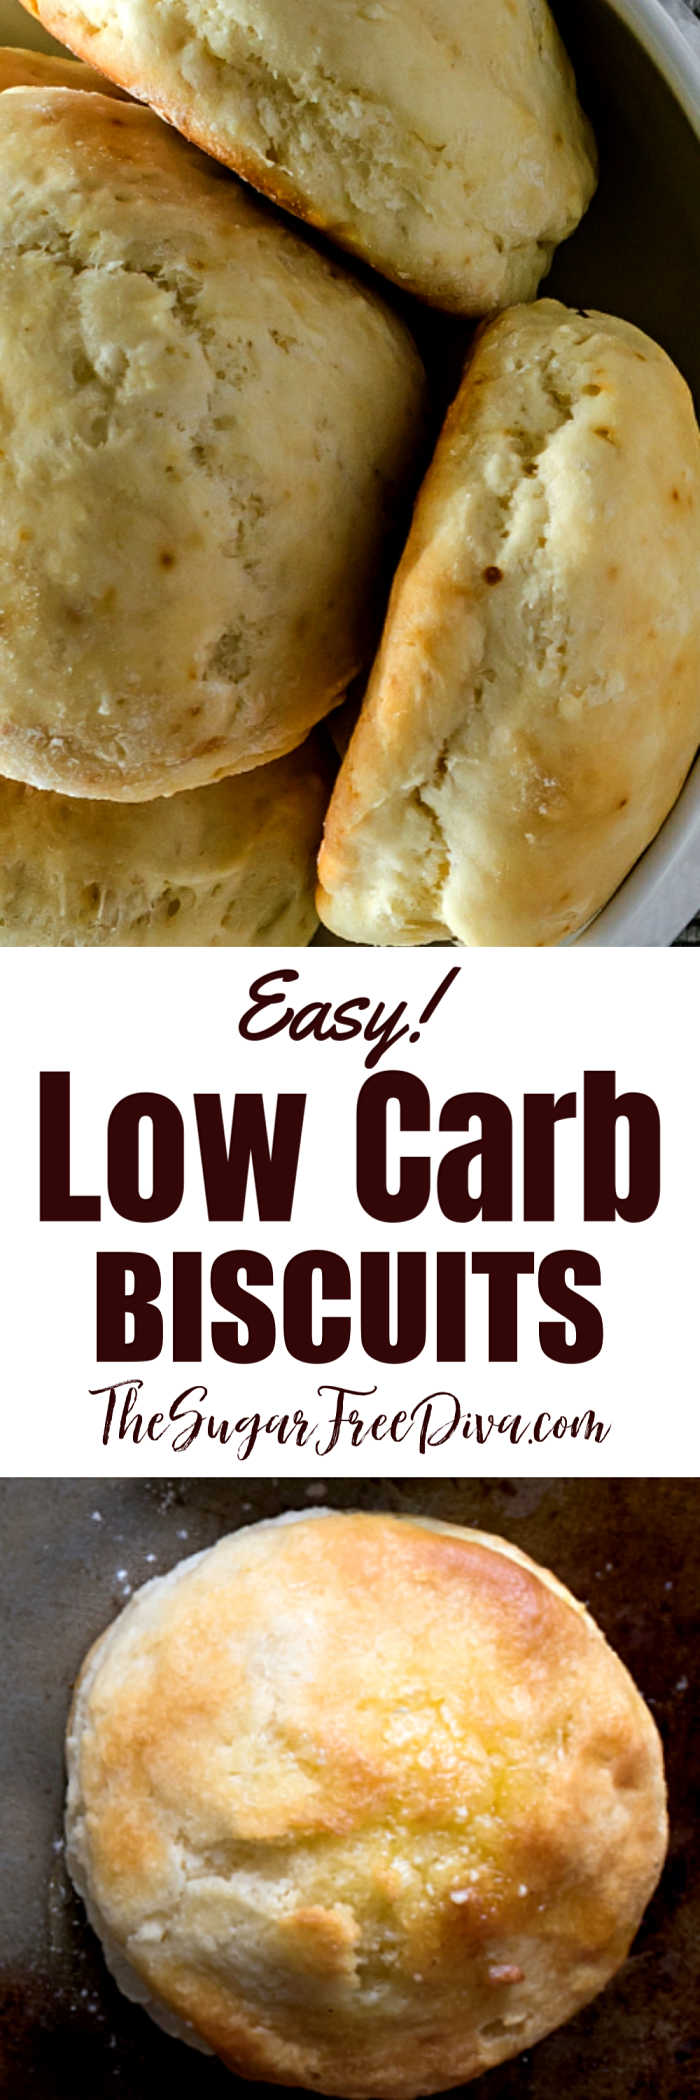 Homemade Low Carb Biscuits